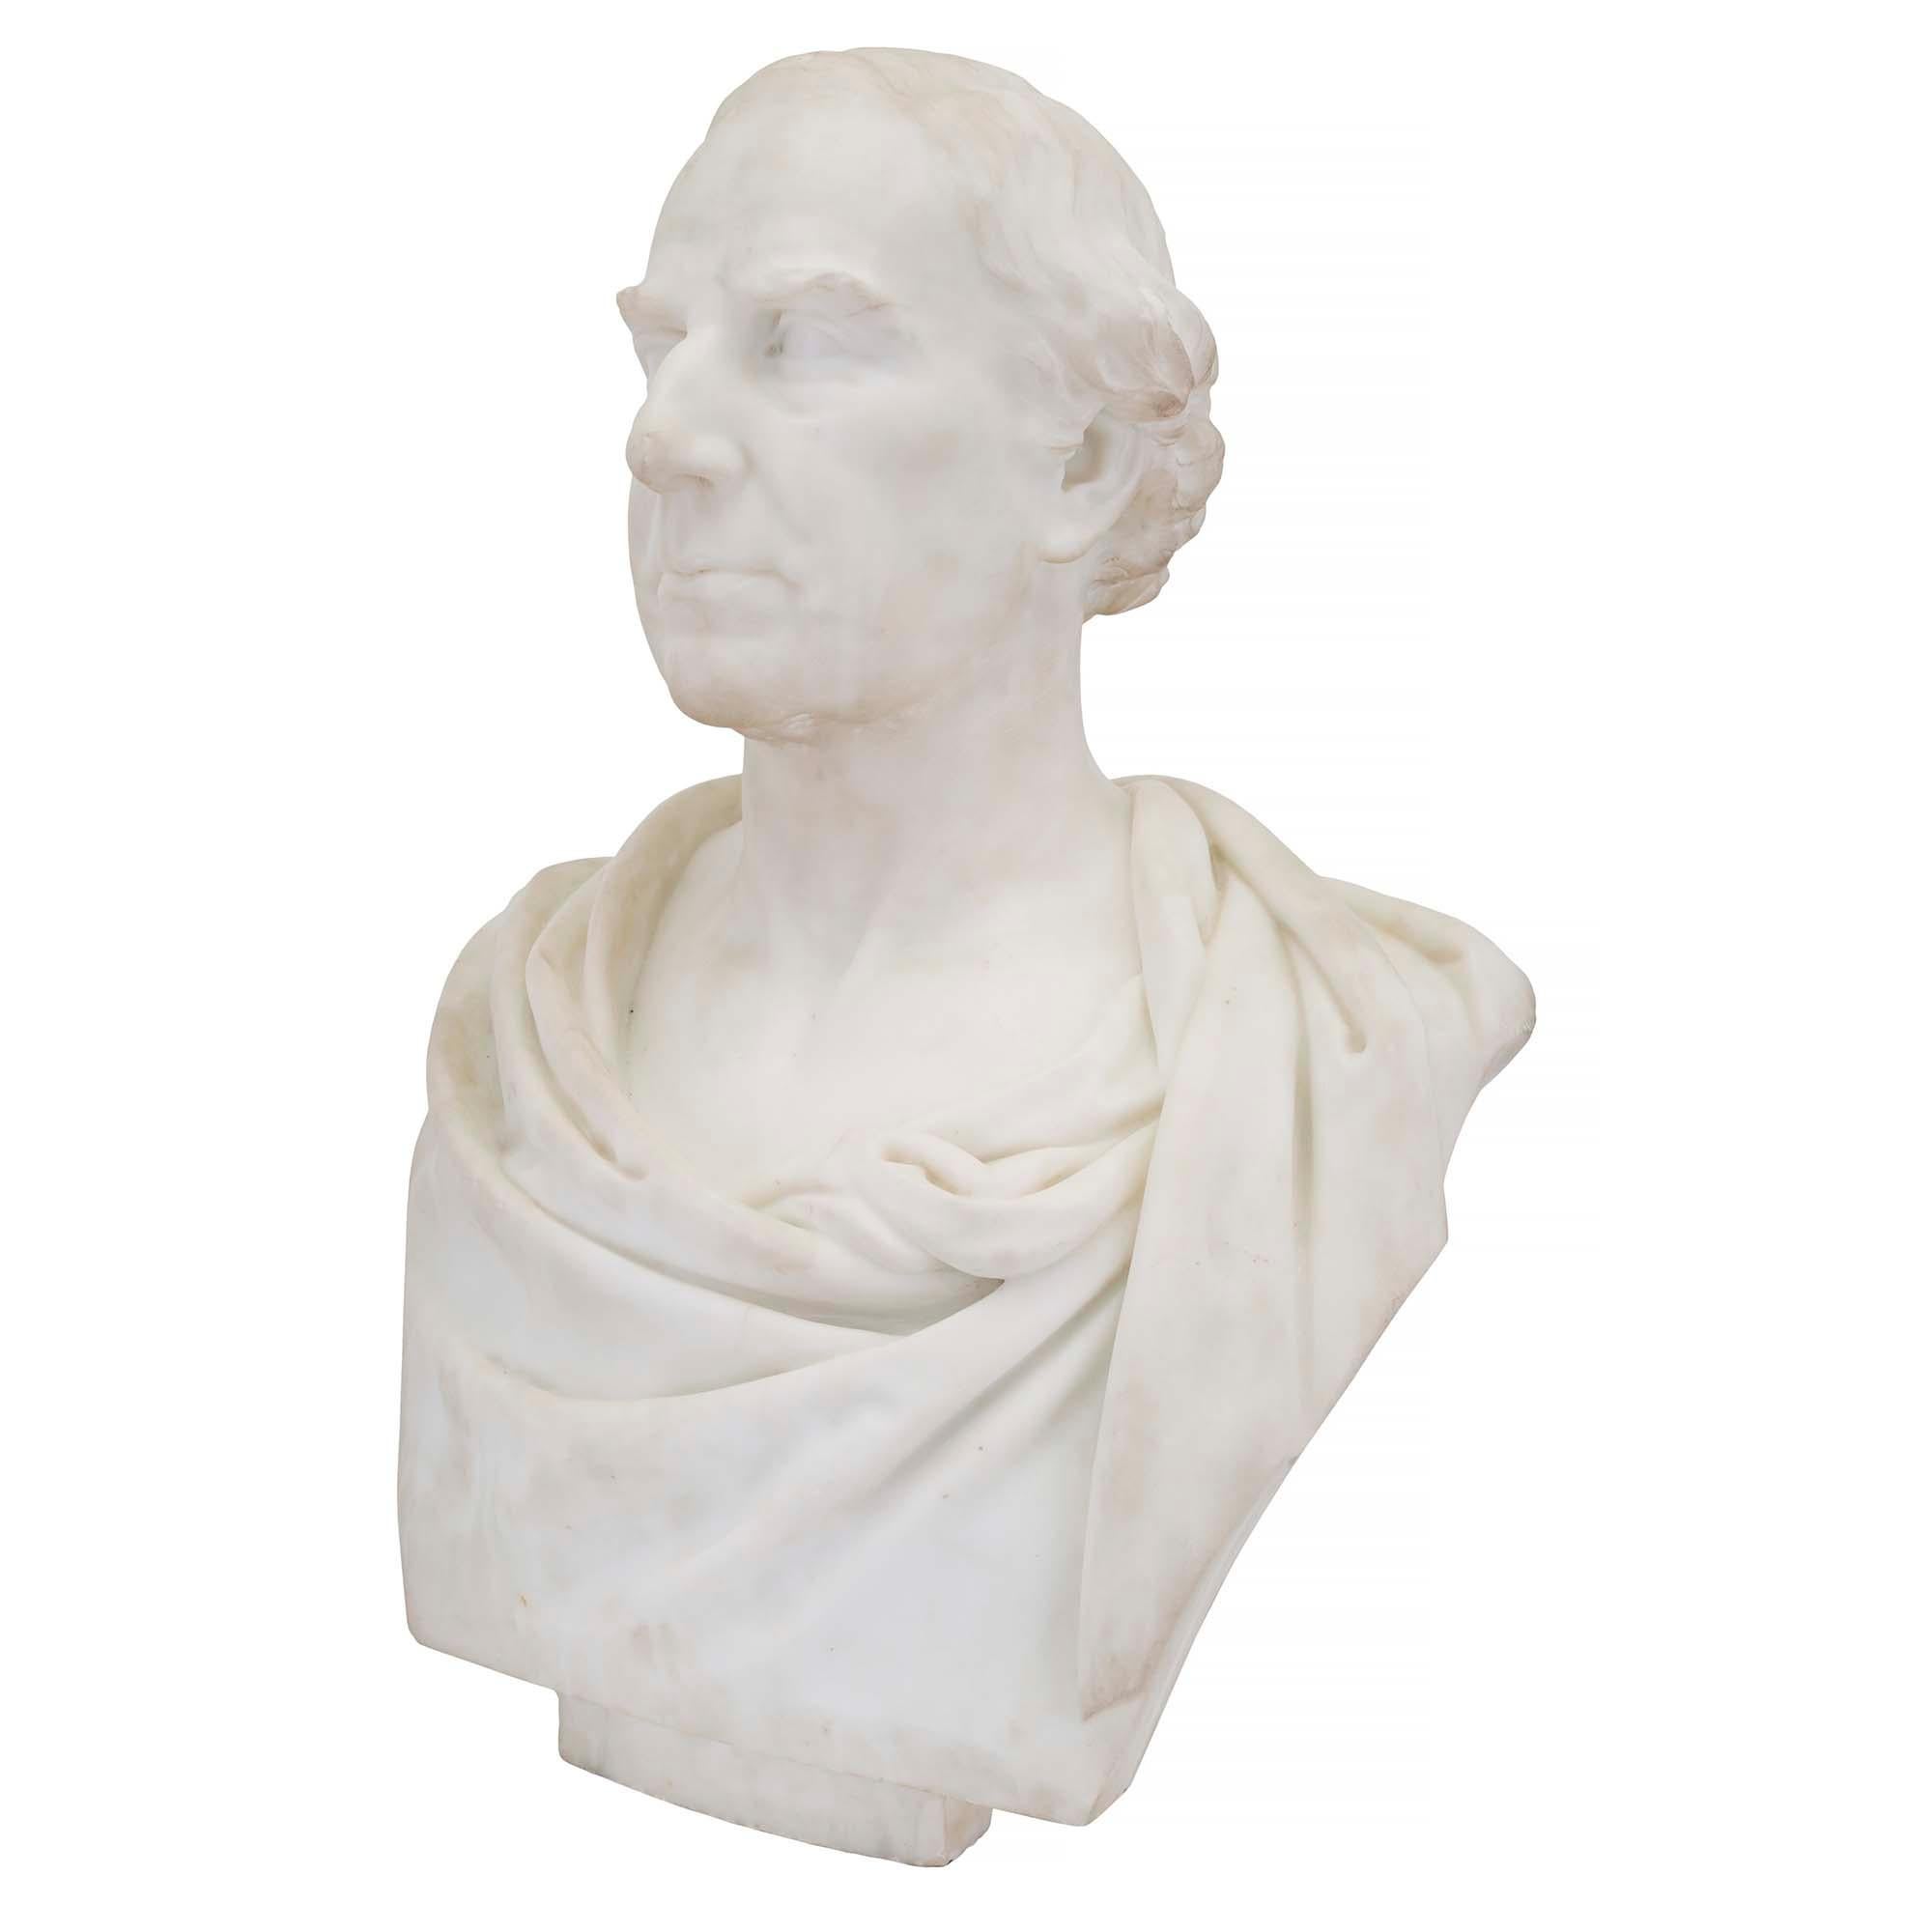 A detailed and wonderfully executed English 19th century white Carrara marble bust of a classical nobleman by famous English sculptor Sir William Hamo Thornycroft. The noble with an expression of confidence and authority is clothed in a classic